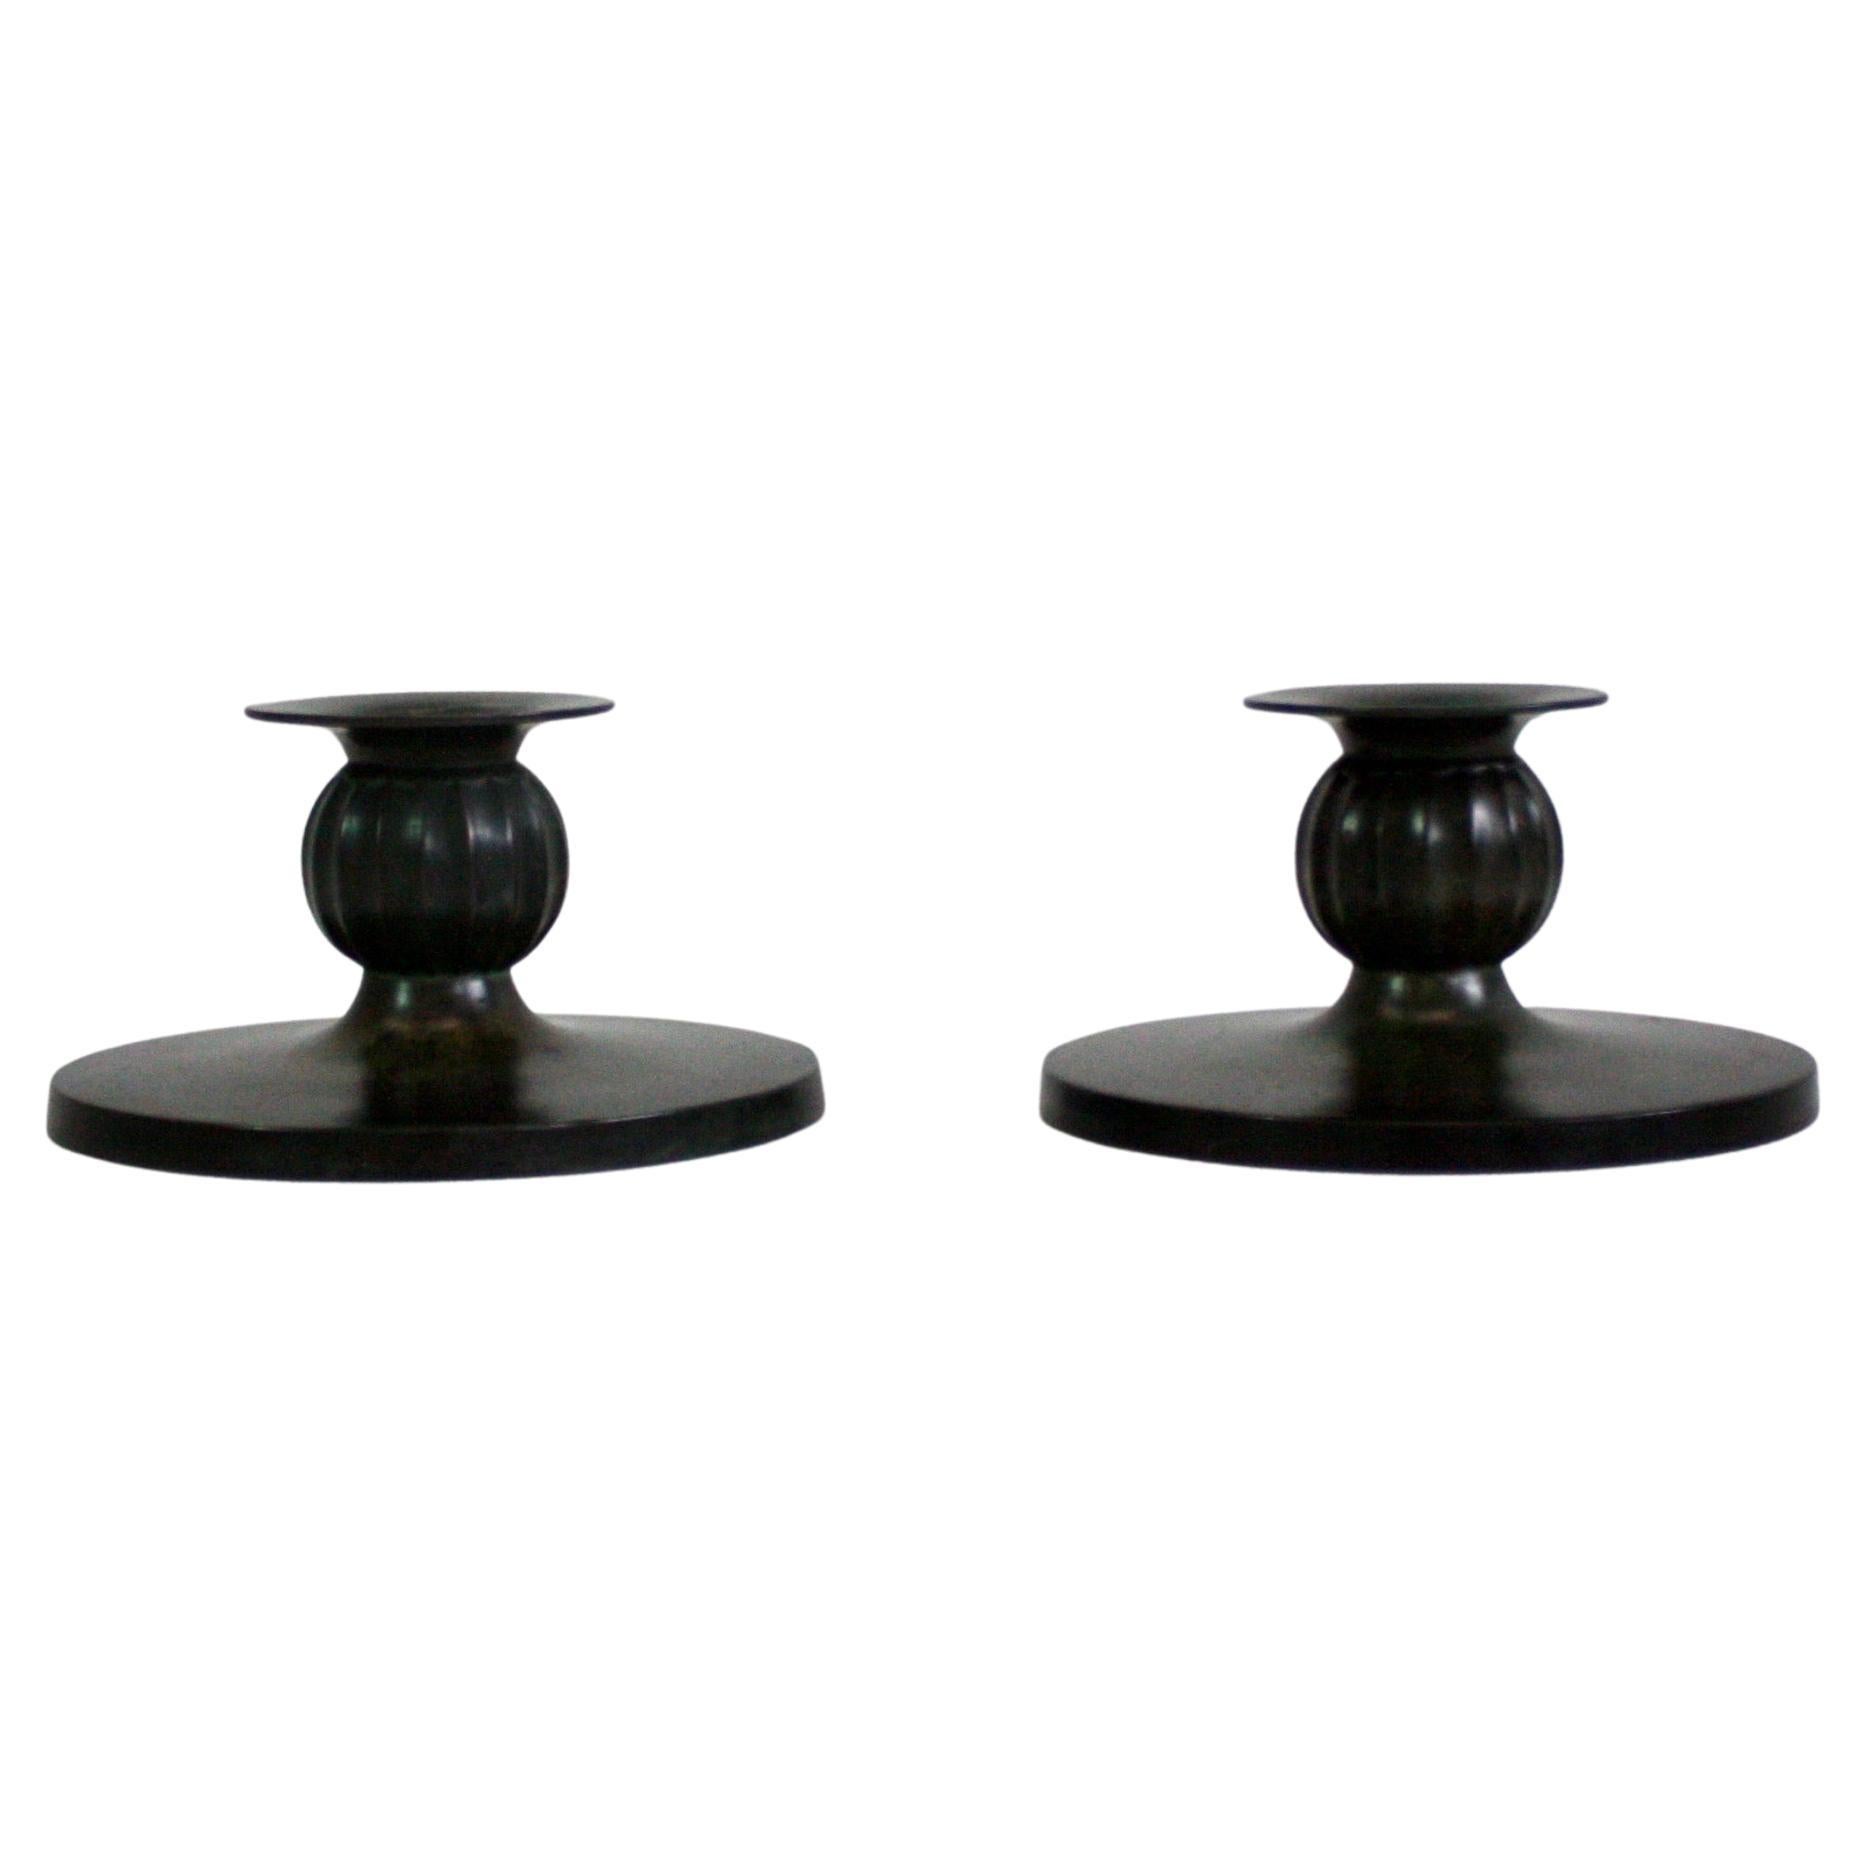 Set of Just Andersen candle holders, 1930s, Denmark